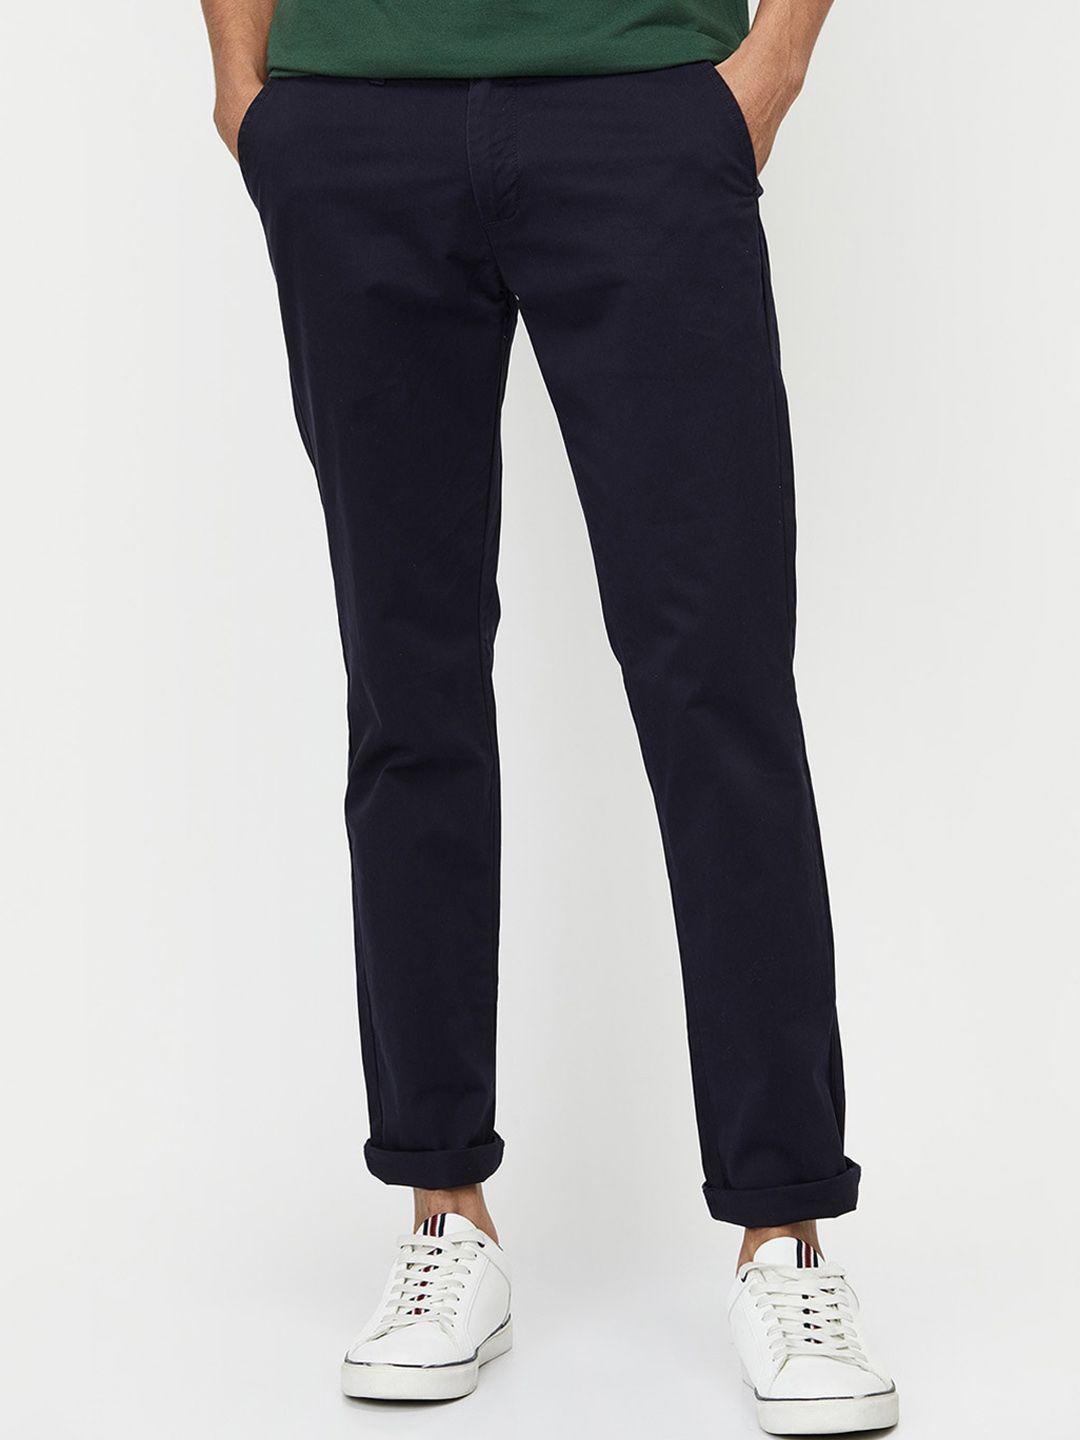 max men navy blue regular fit solid chinos trousers